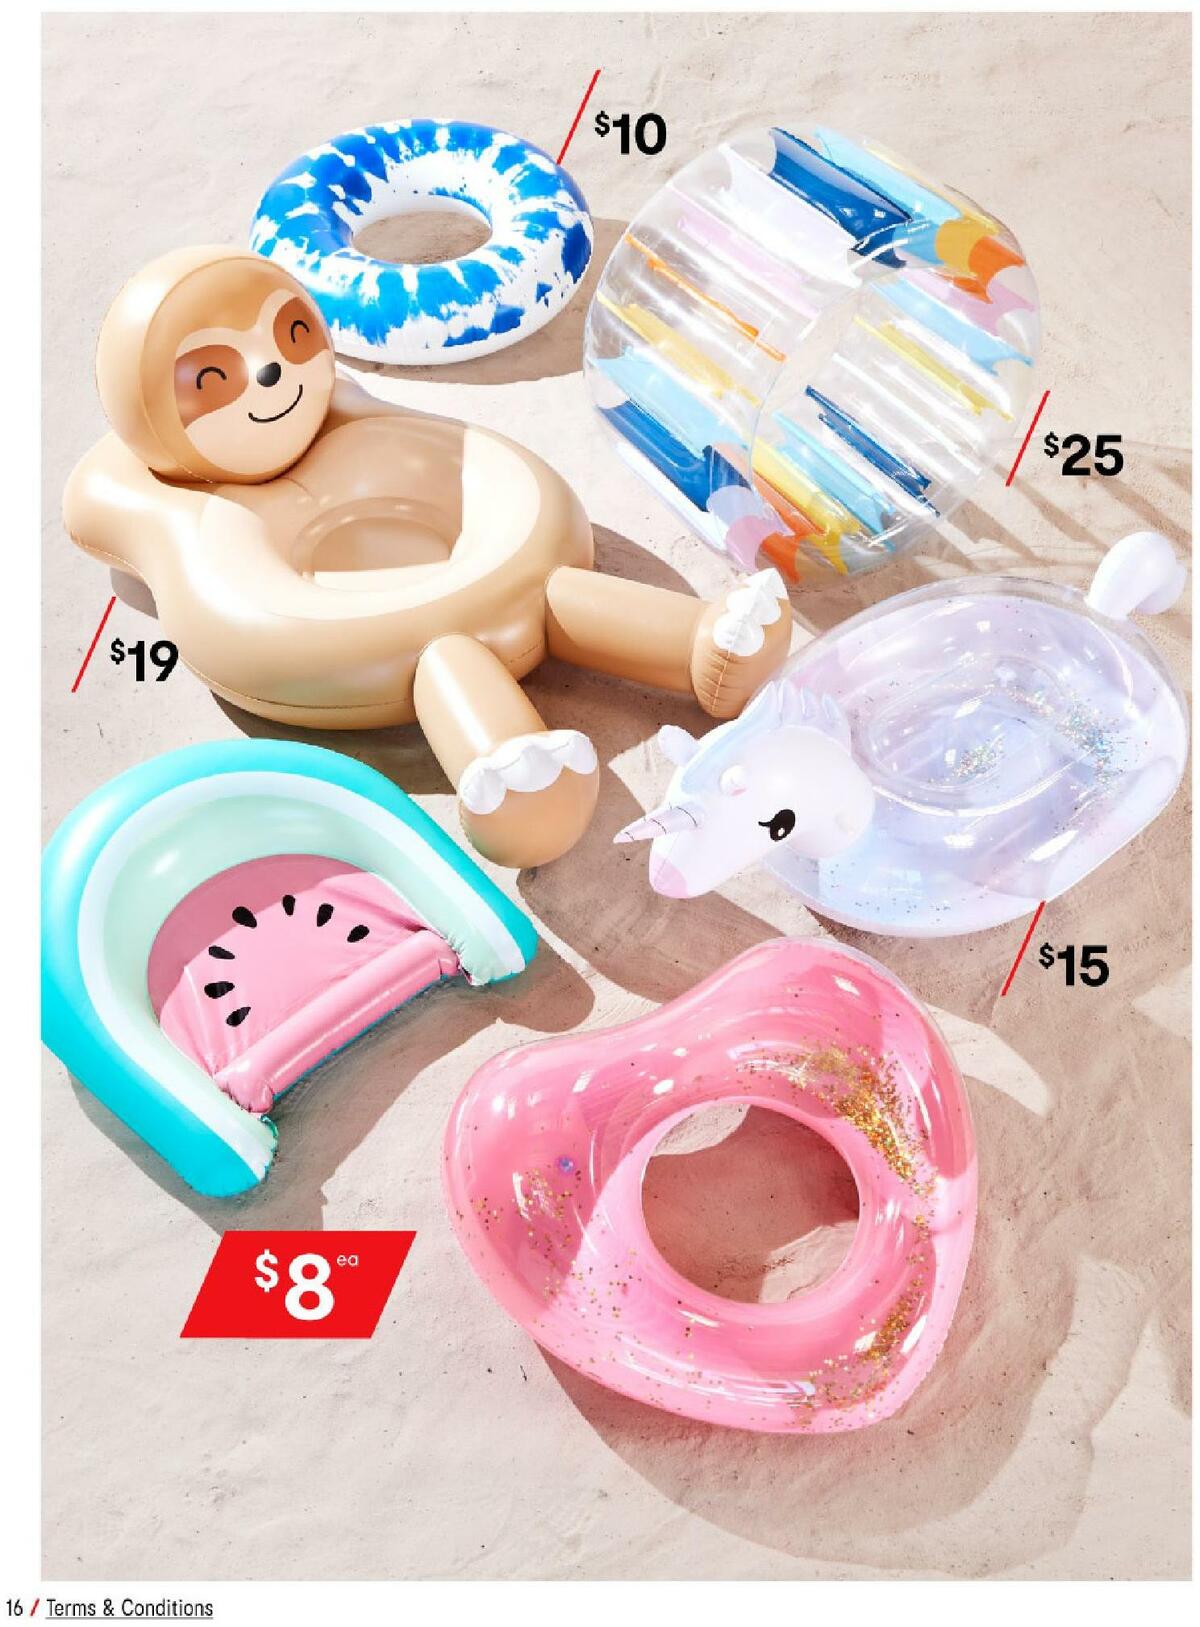 Kmart Catalogues from 2 December